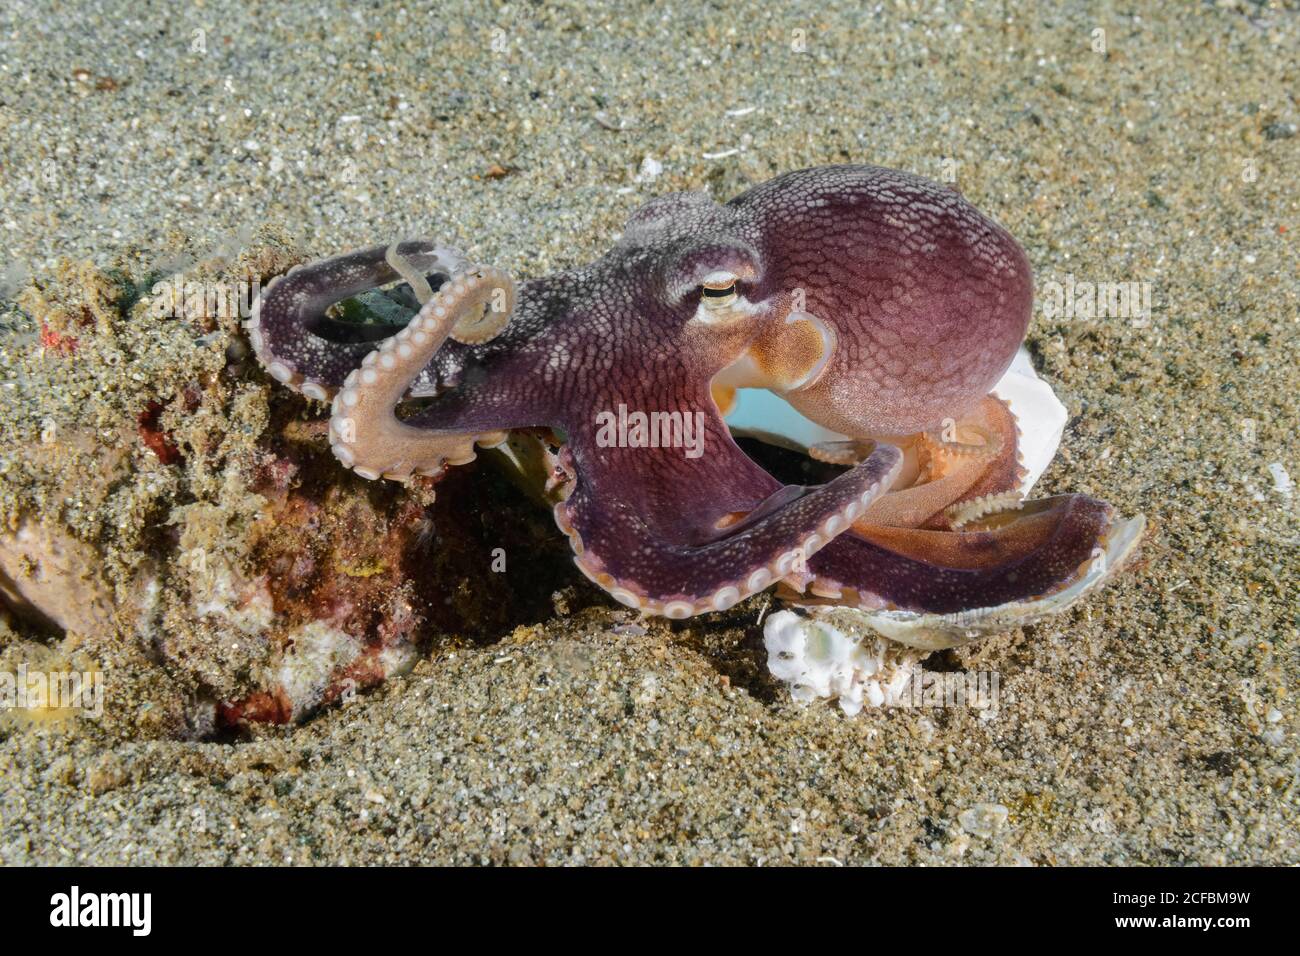 Coconut octopus Octopus marginatus, gathering bits of shells and glass to create shelter, Ambon, Indonesia, Banda Sea, Pacific Ocean Stock Photo